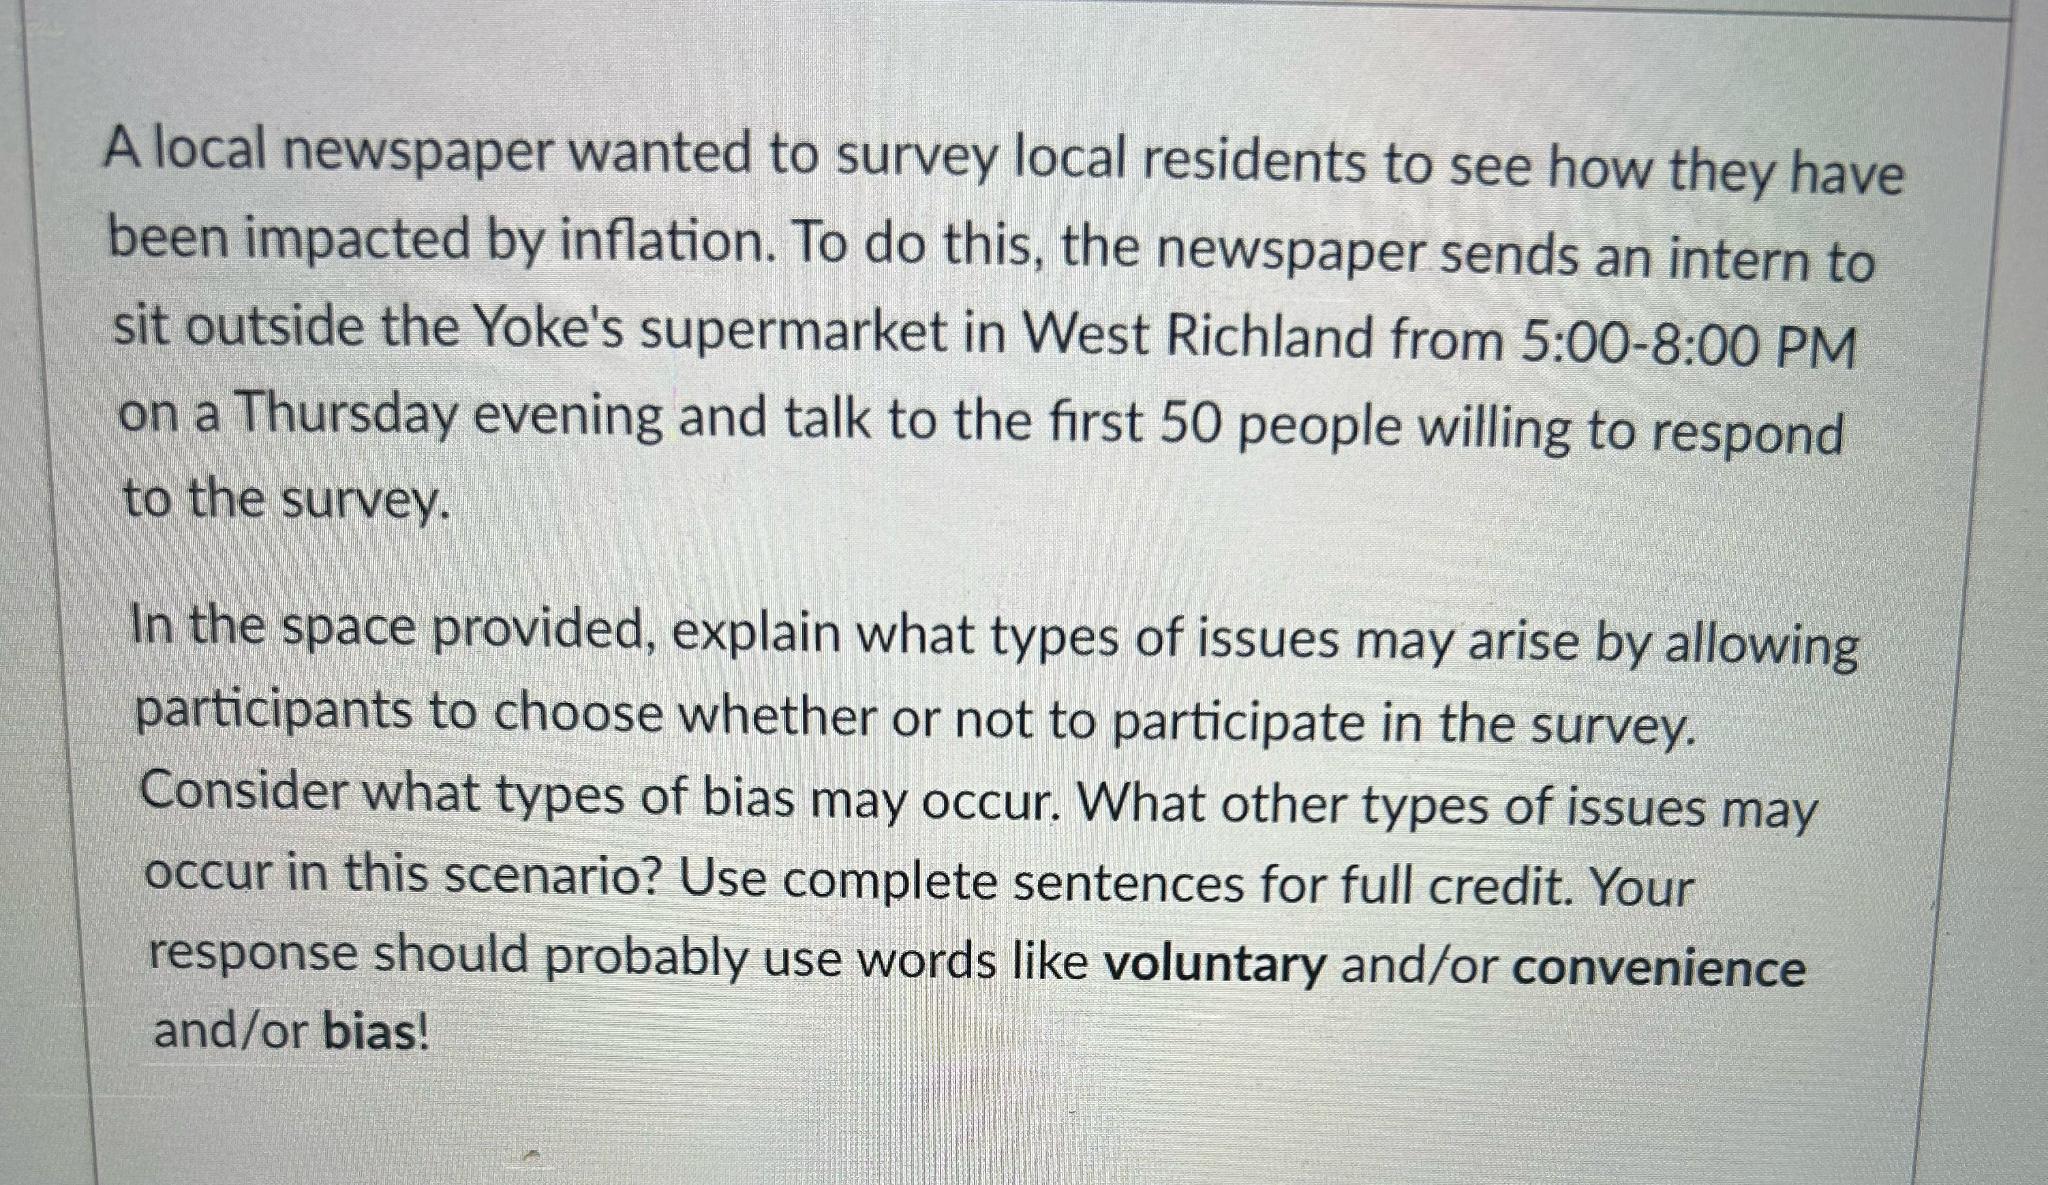 A local newspaper wanted to survey local residents to see how they have been impacted by inflation. To do